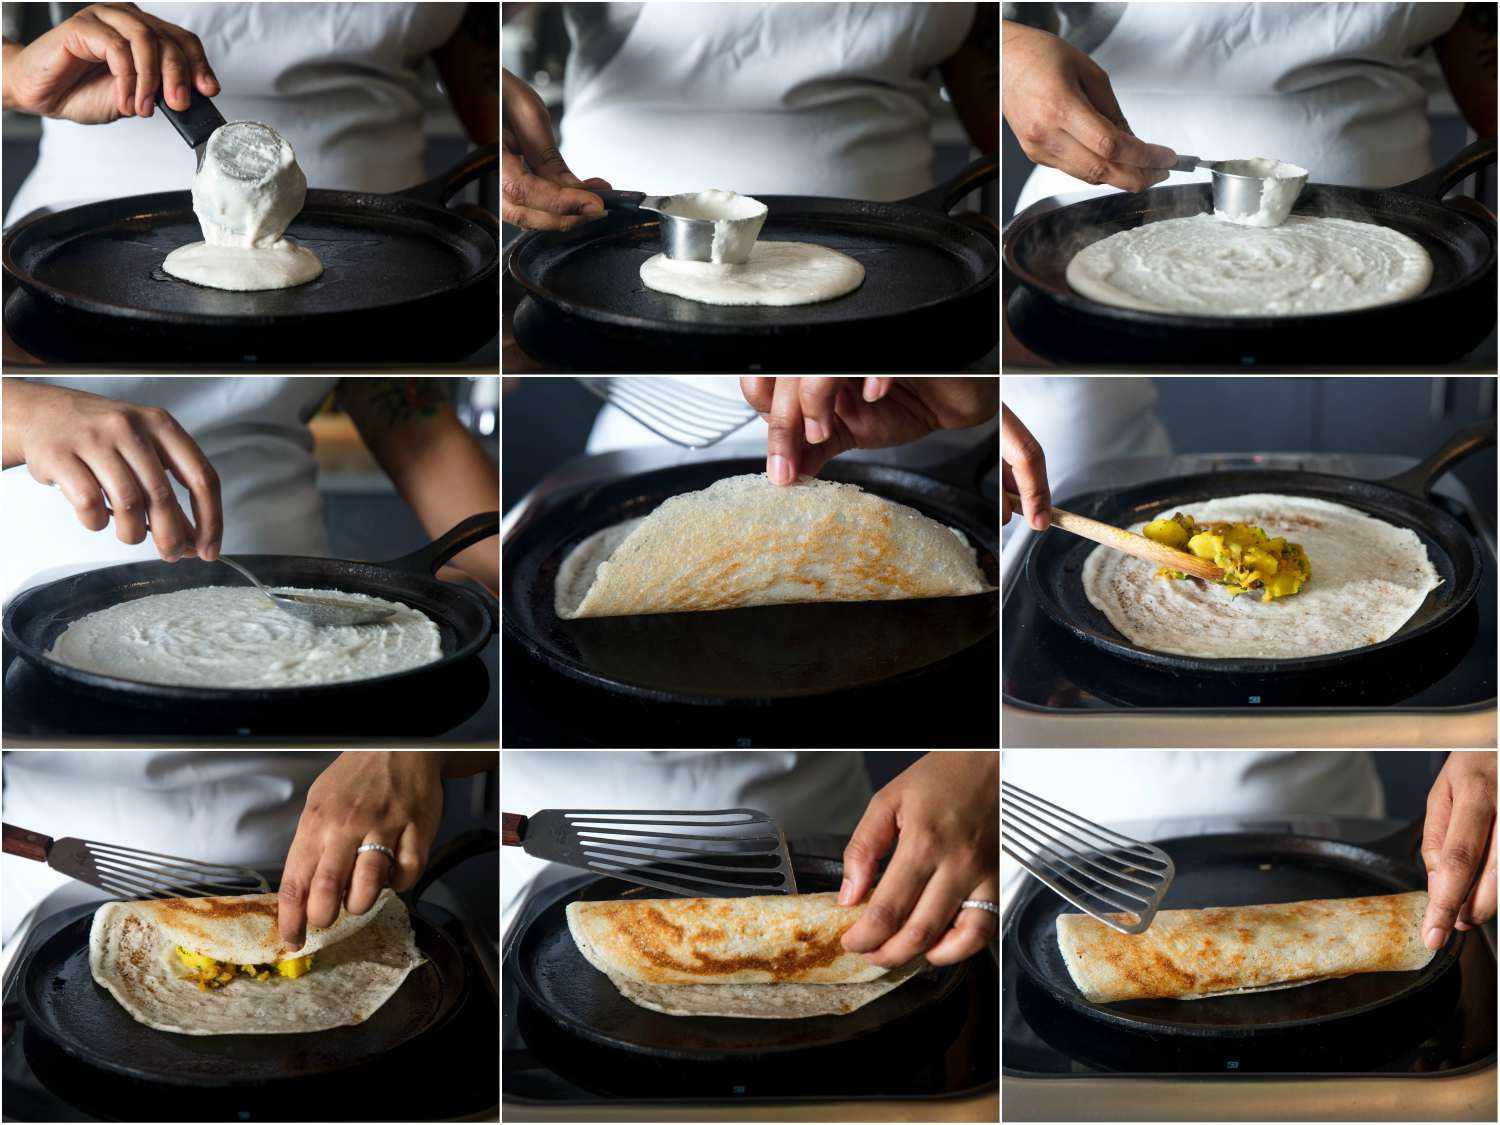 A nine-image collage showing stages of making a dosa: dropping batter onto a griddle, smoothing into a round, lifting edges, adding filling, and folding over.